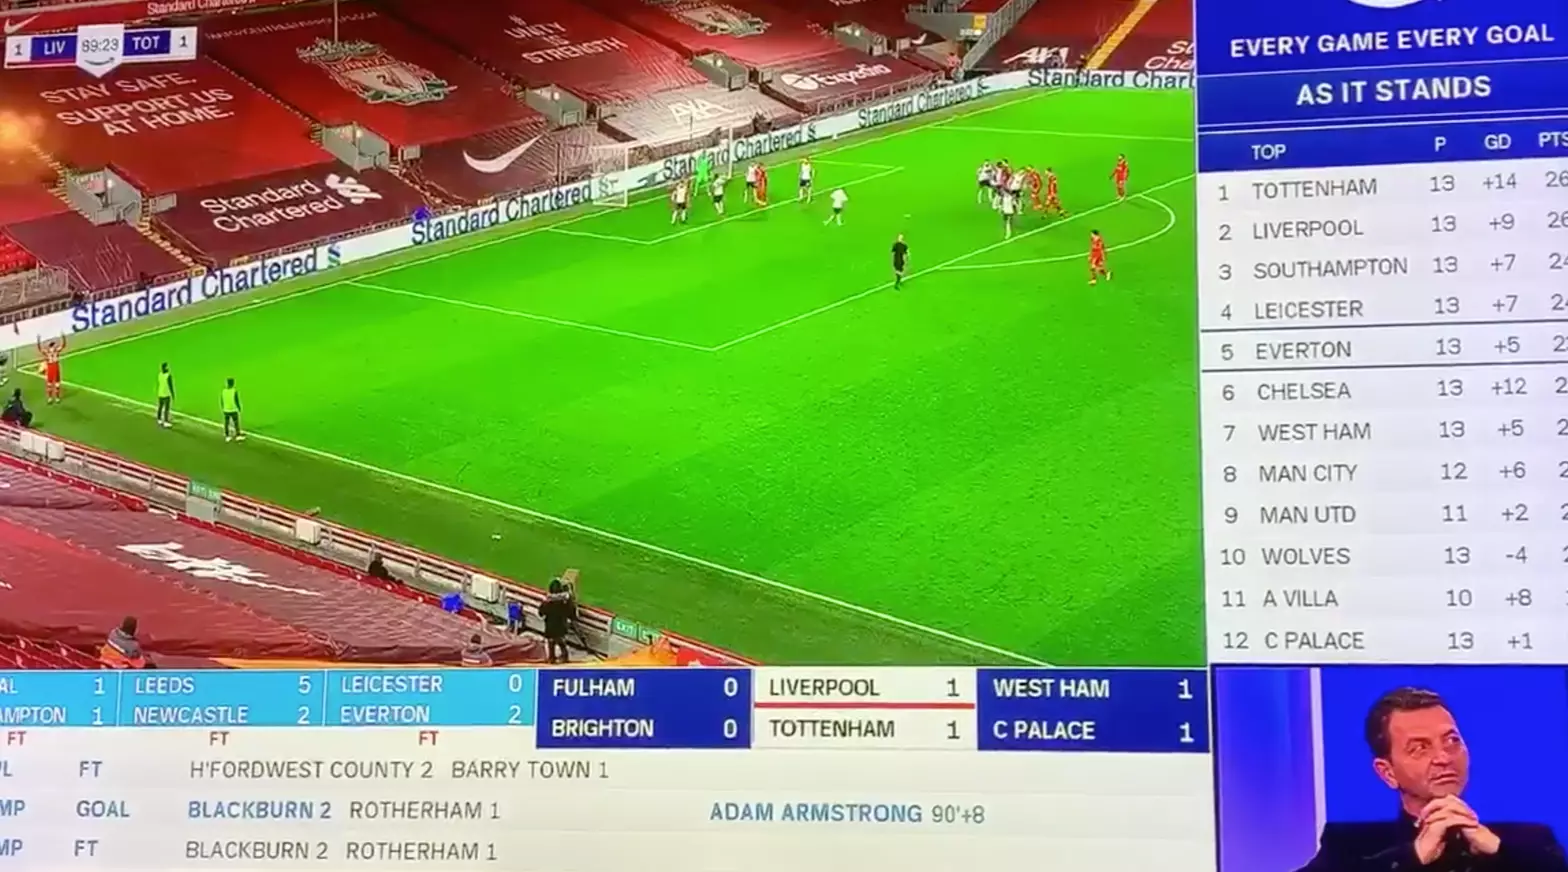 Tim Sherwood "Wasn't Worried" About Liverpool's Corner Vs Tottenham - They Scored Seconds Later